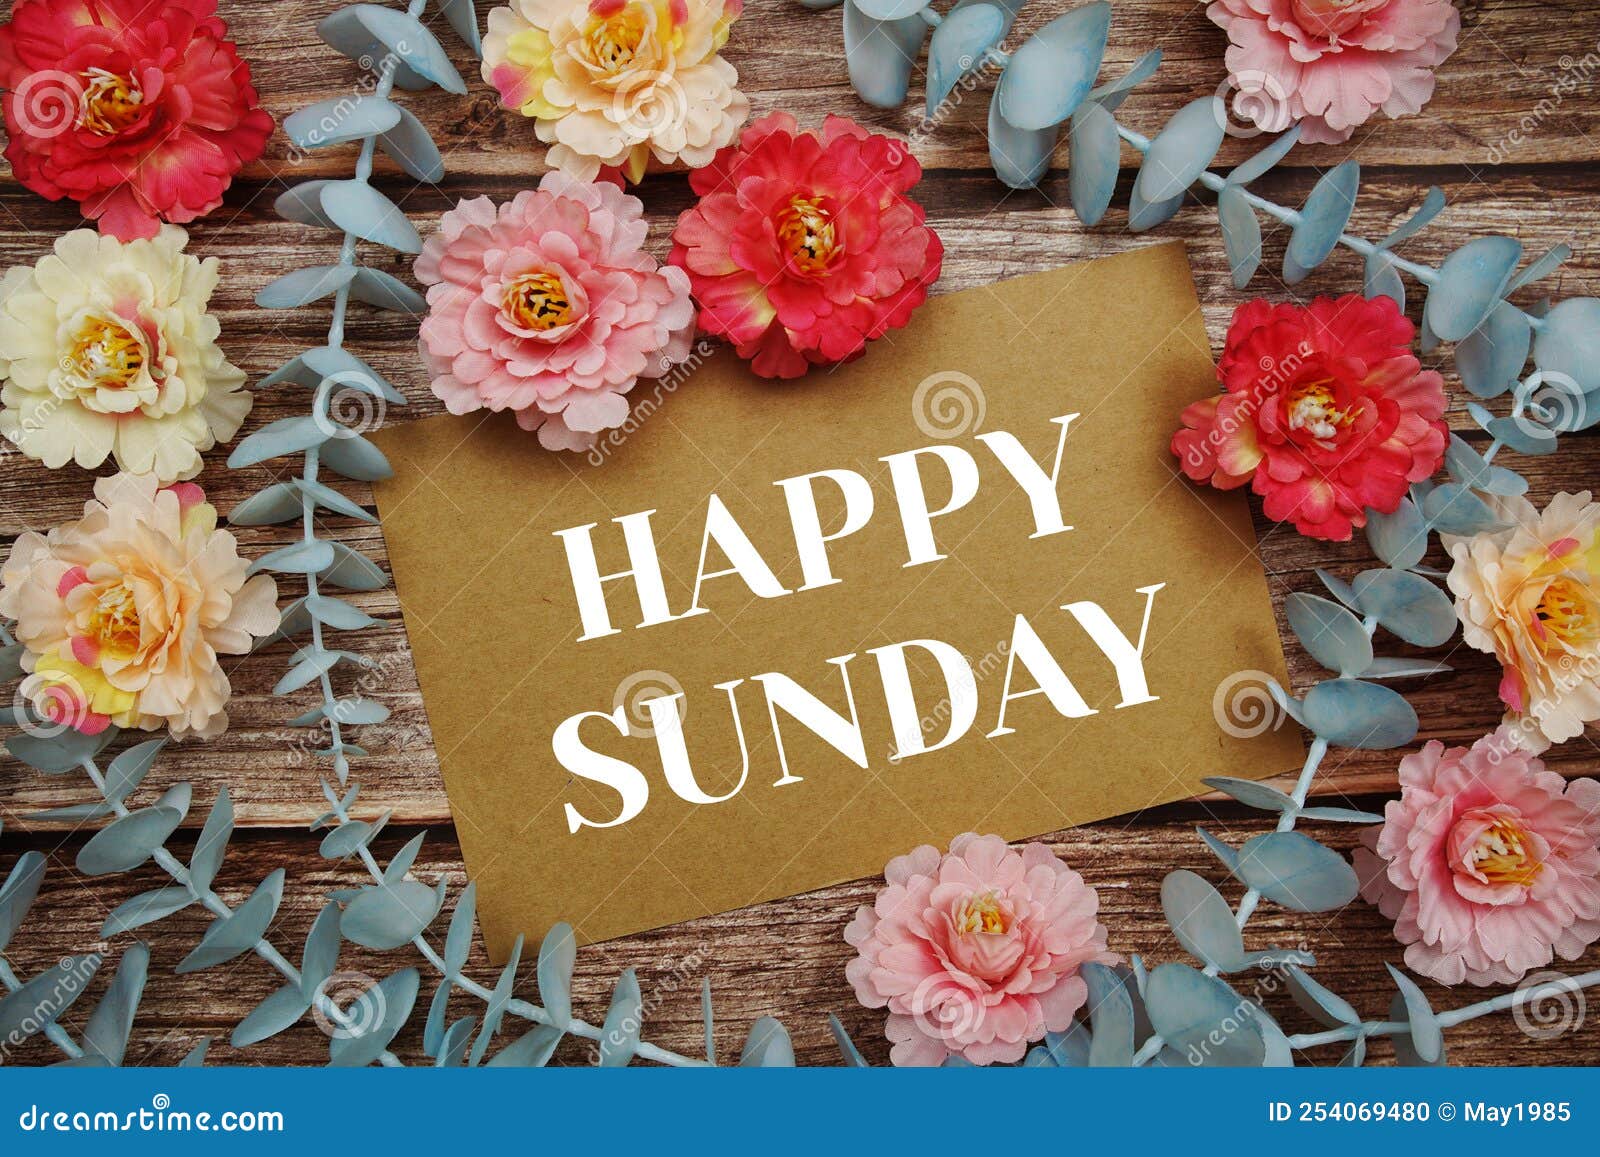 Happy Sunday Typography Text on Paper Card Decorate with Flower on ...